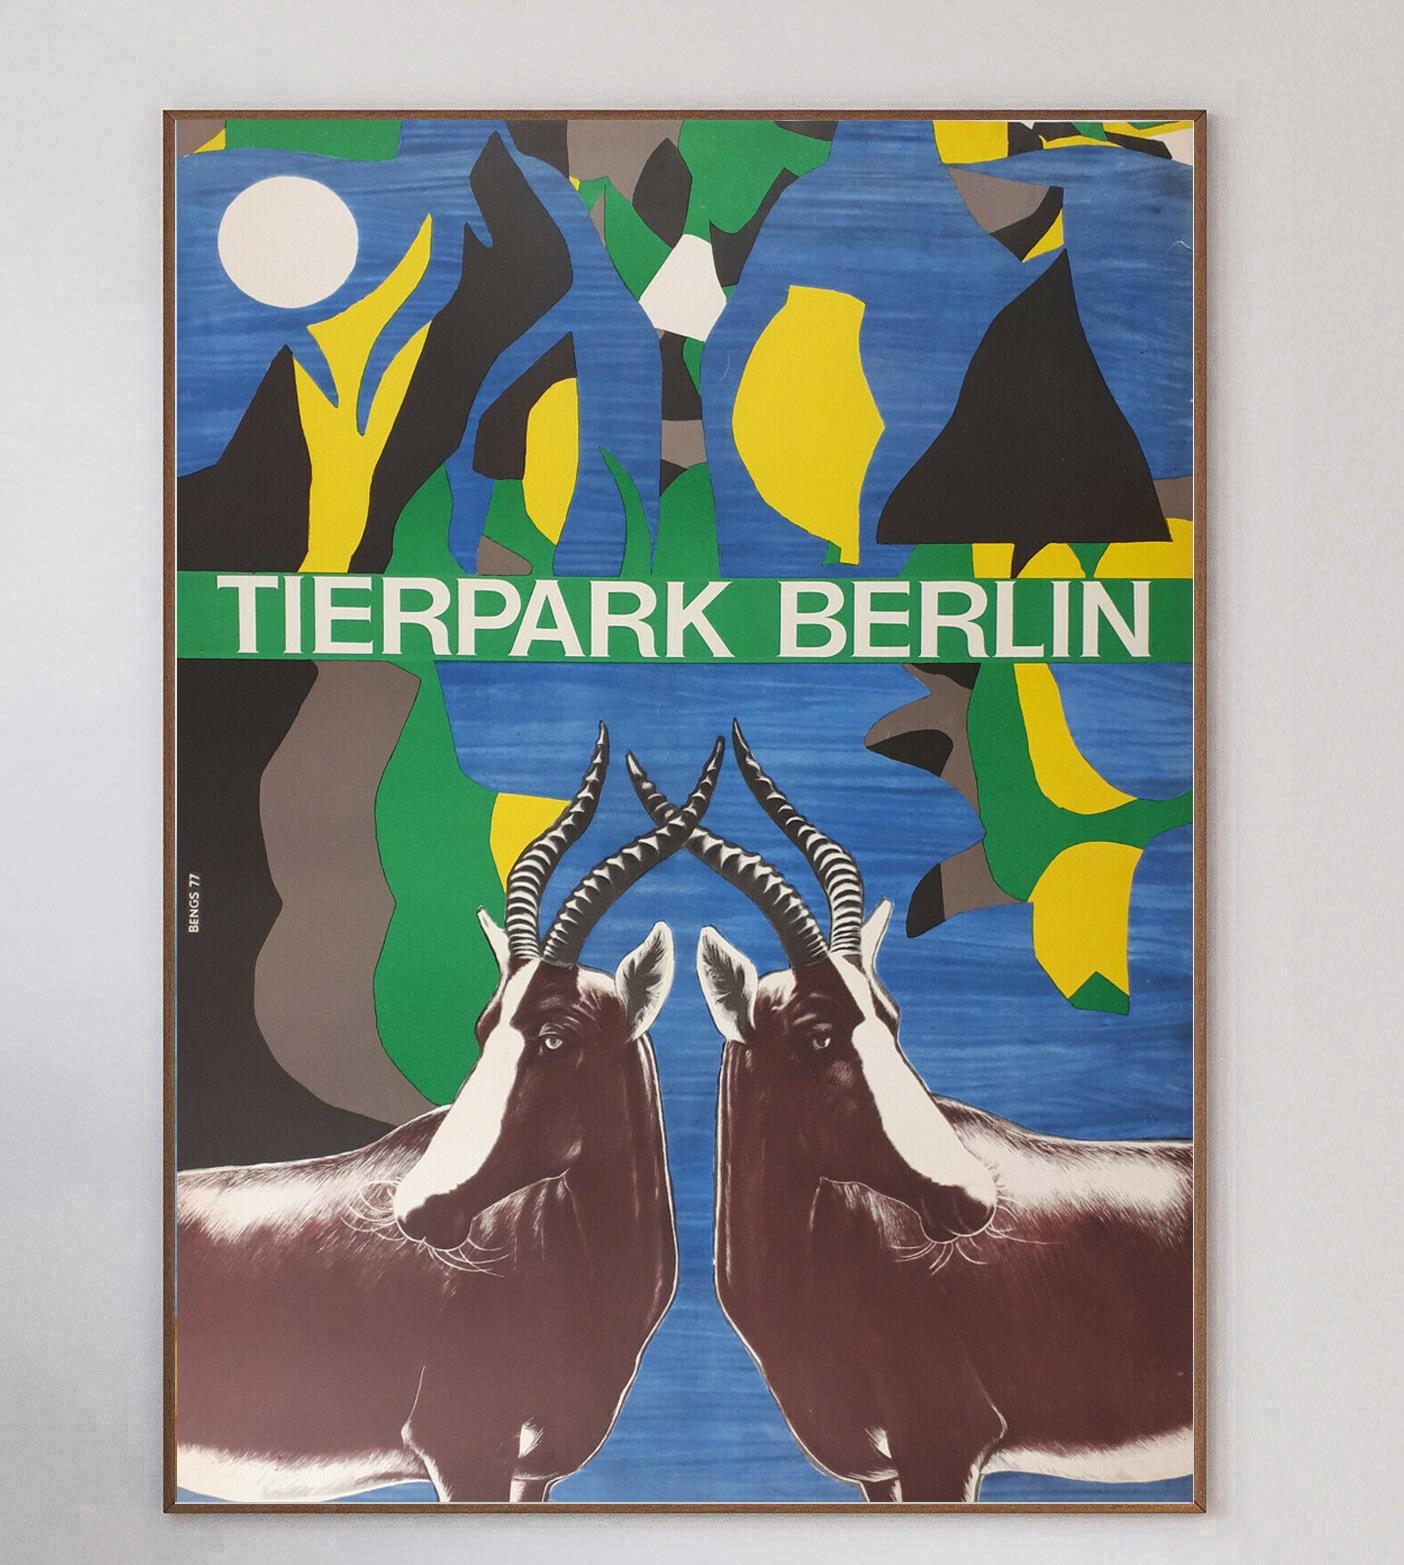 Wonderful poster from 1977 with fantastic graphic artwork from Axel Bengs depicting antelope for the Tierpark Berlin. Founded in 1955 in Friedrichsfelde, the zoo was set up to rival the Berlin Zoological Garden, the oldest zoo in Germany and today,